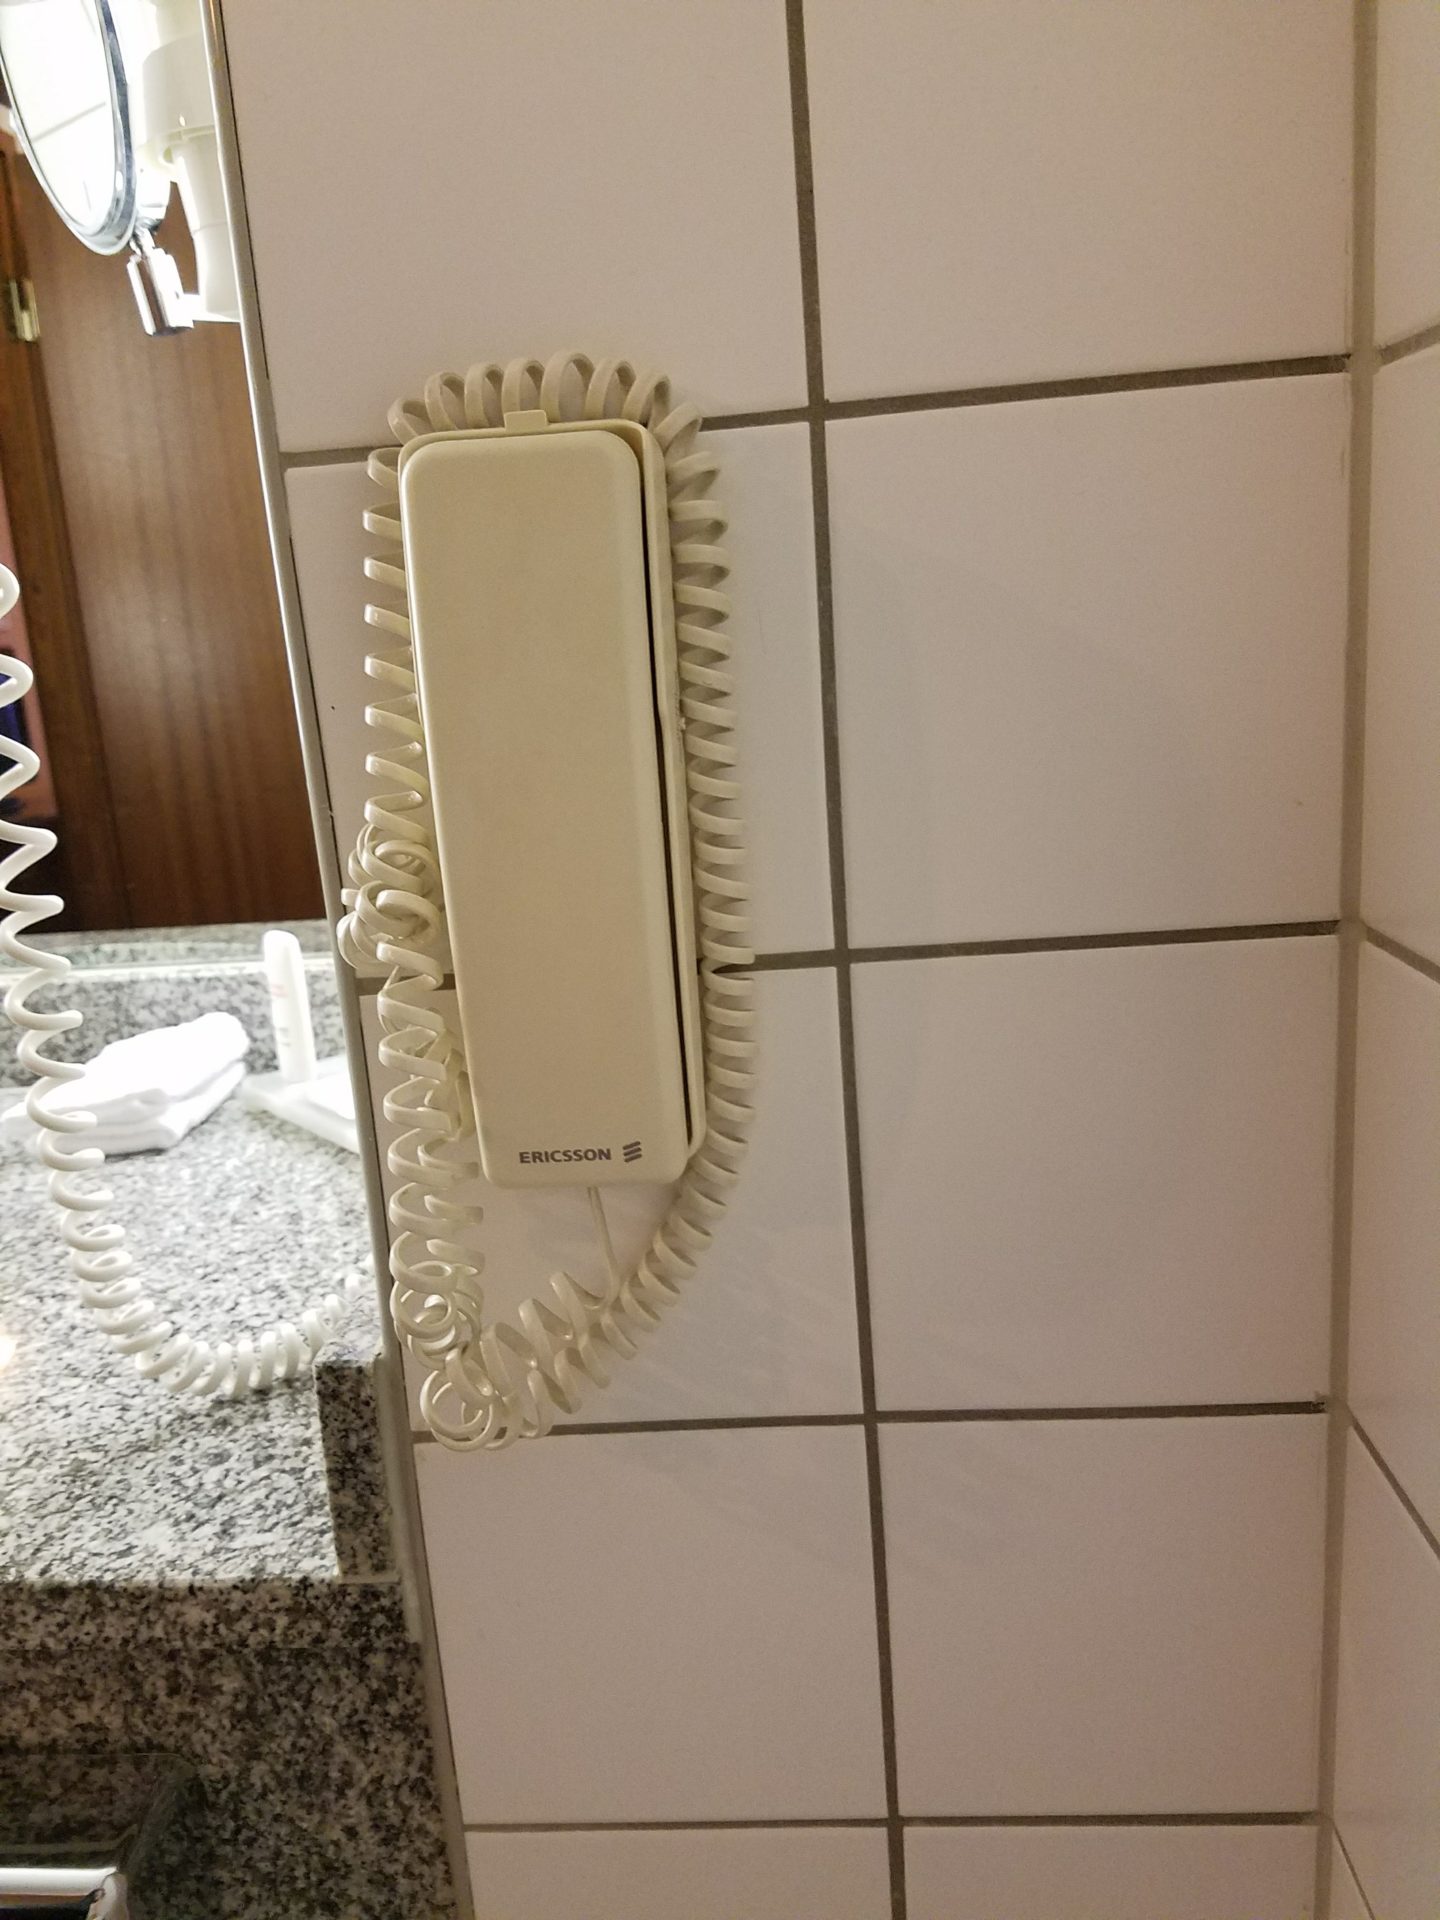 a telephone on the wall